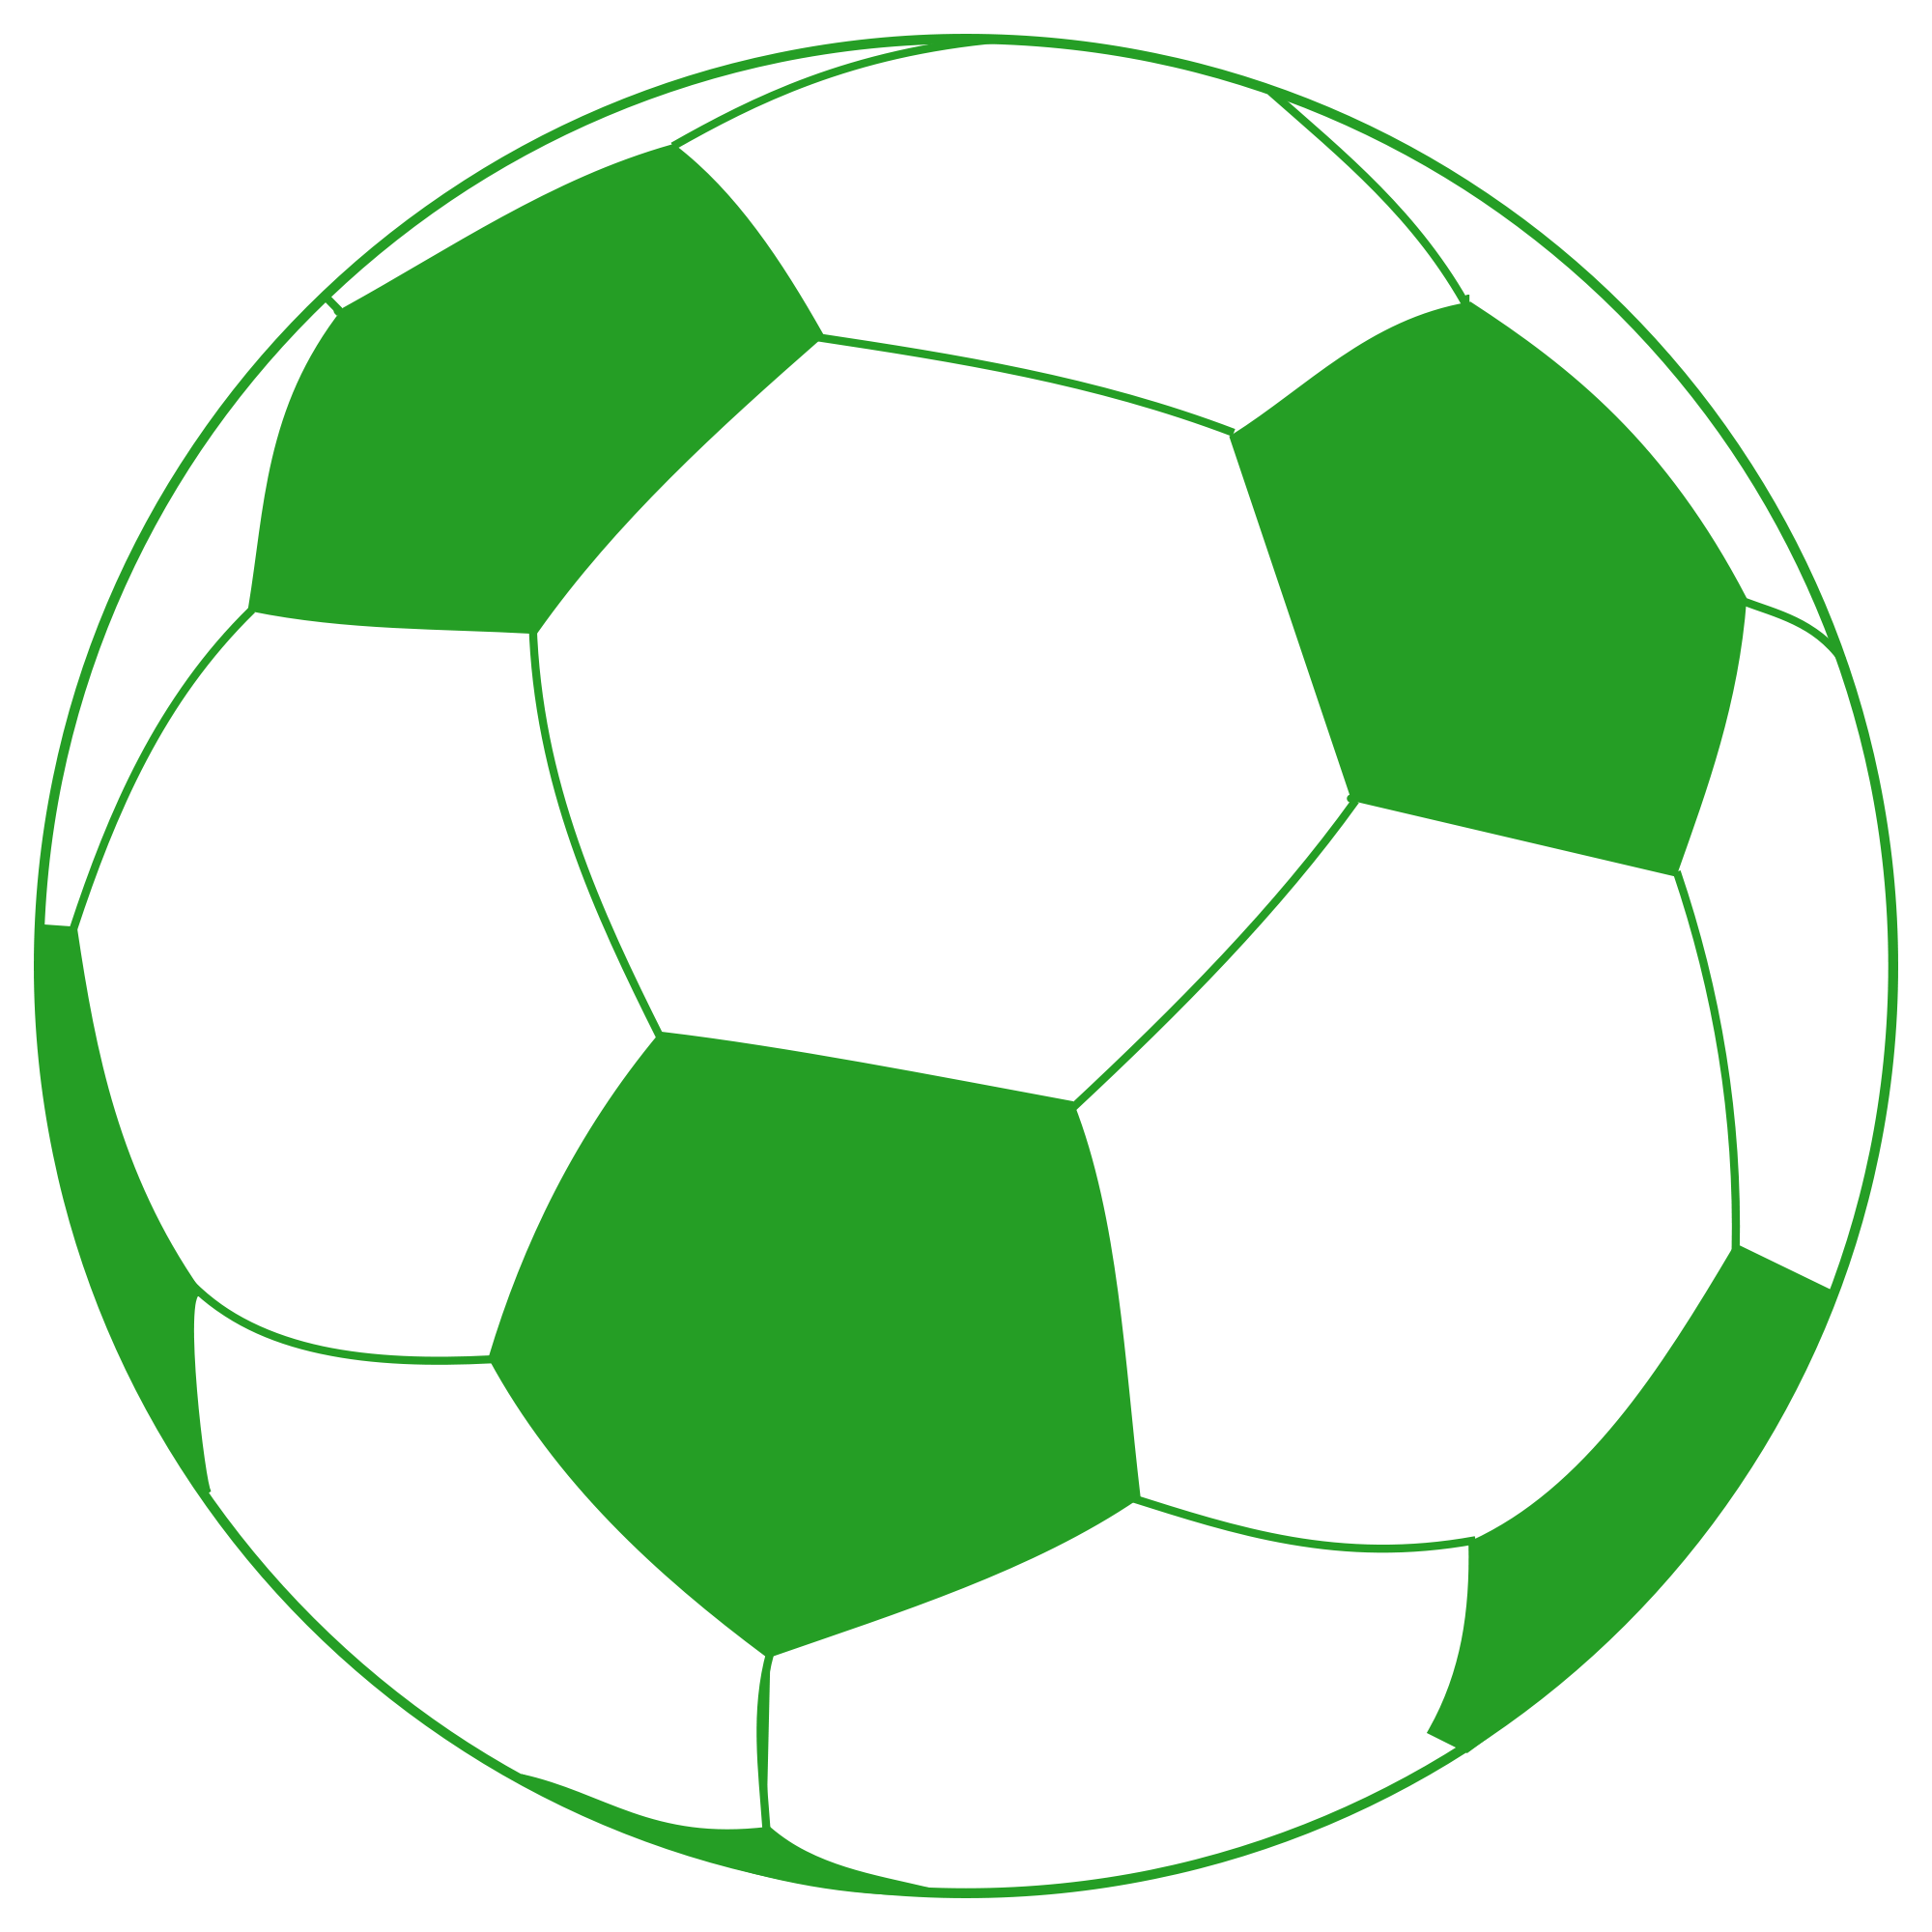 How to draw a cartoon soccer ball clipart images gallery for